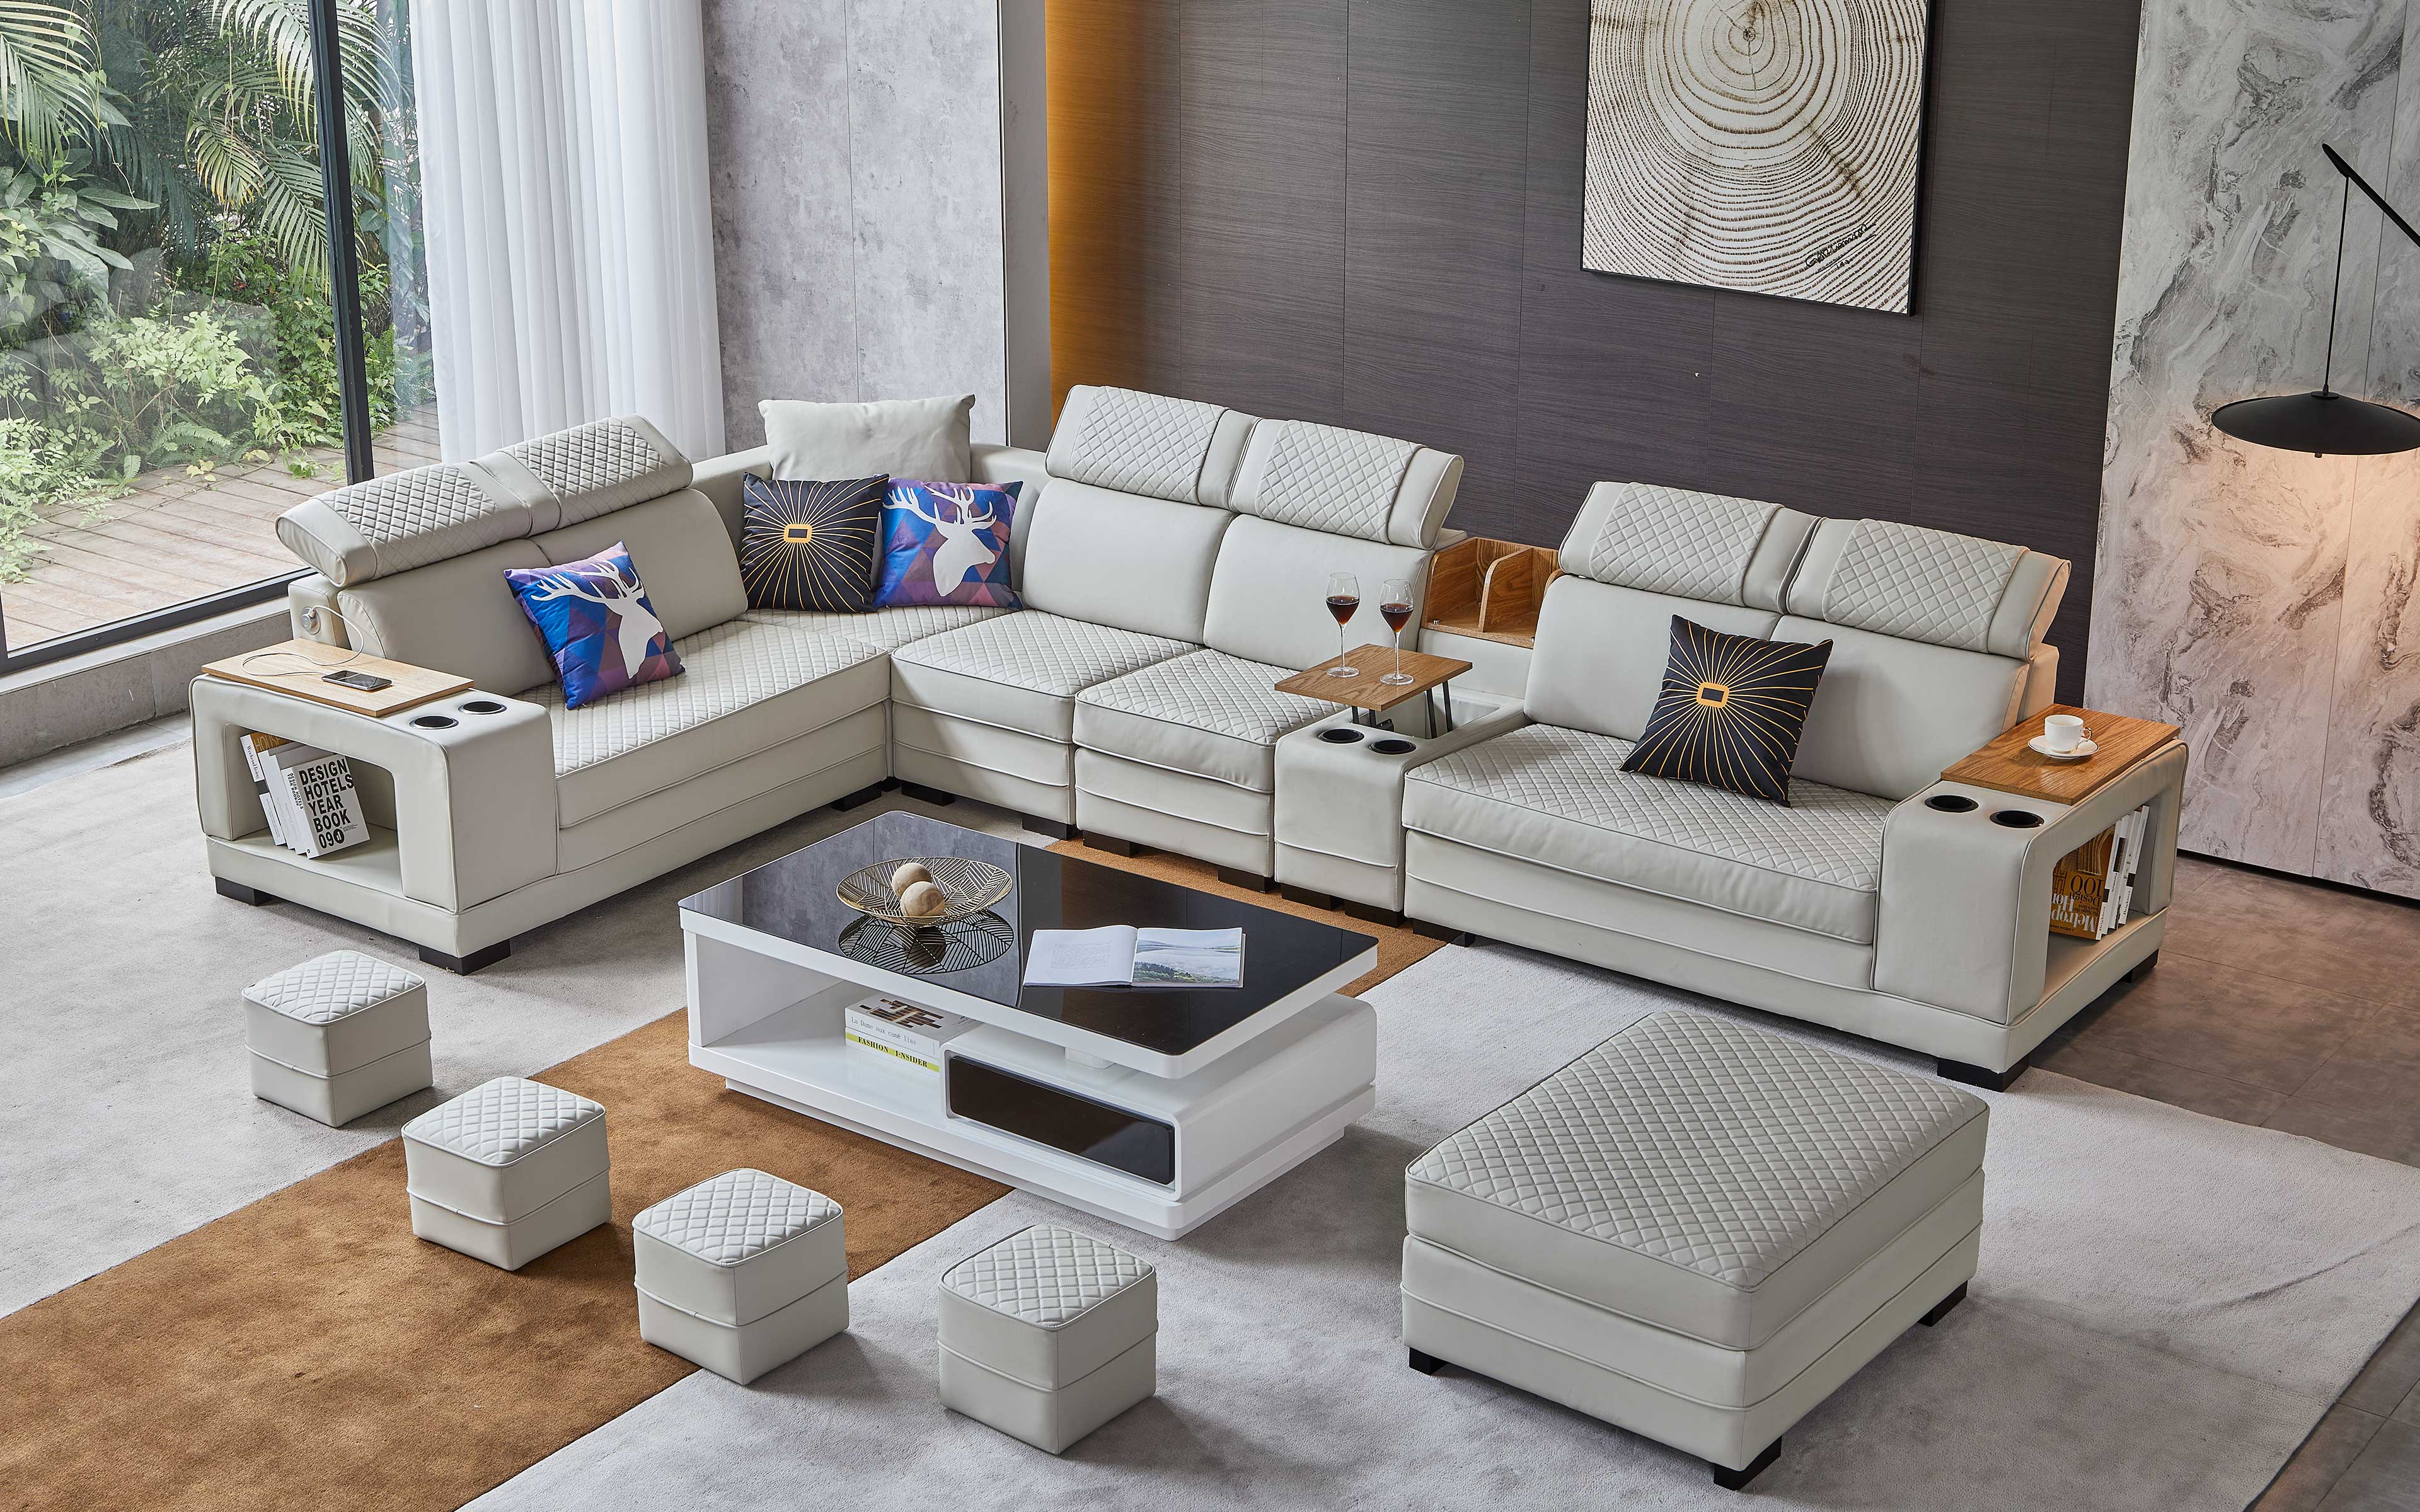 Apus Off-White Modular Tufted Sectional